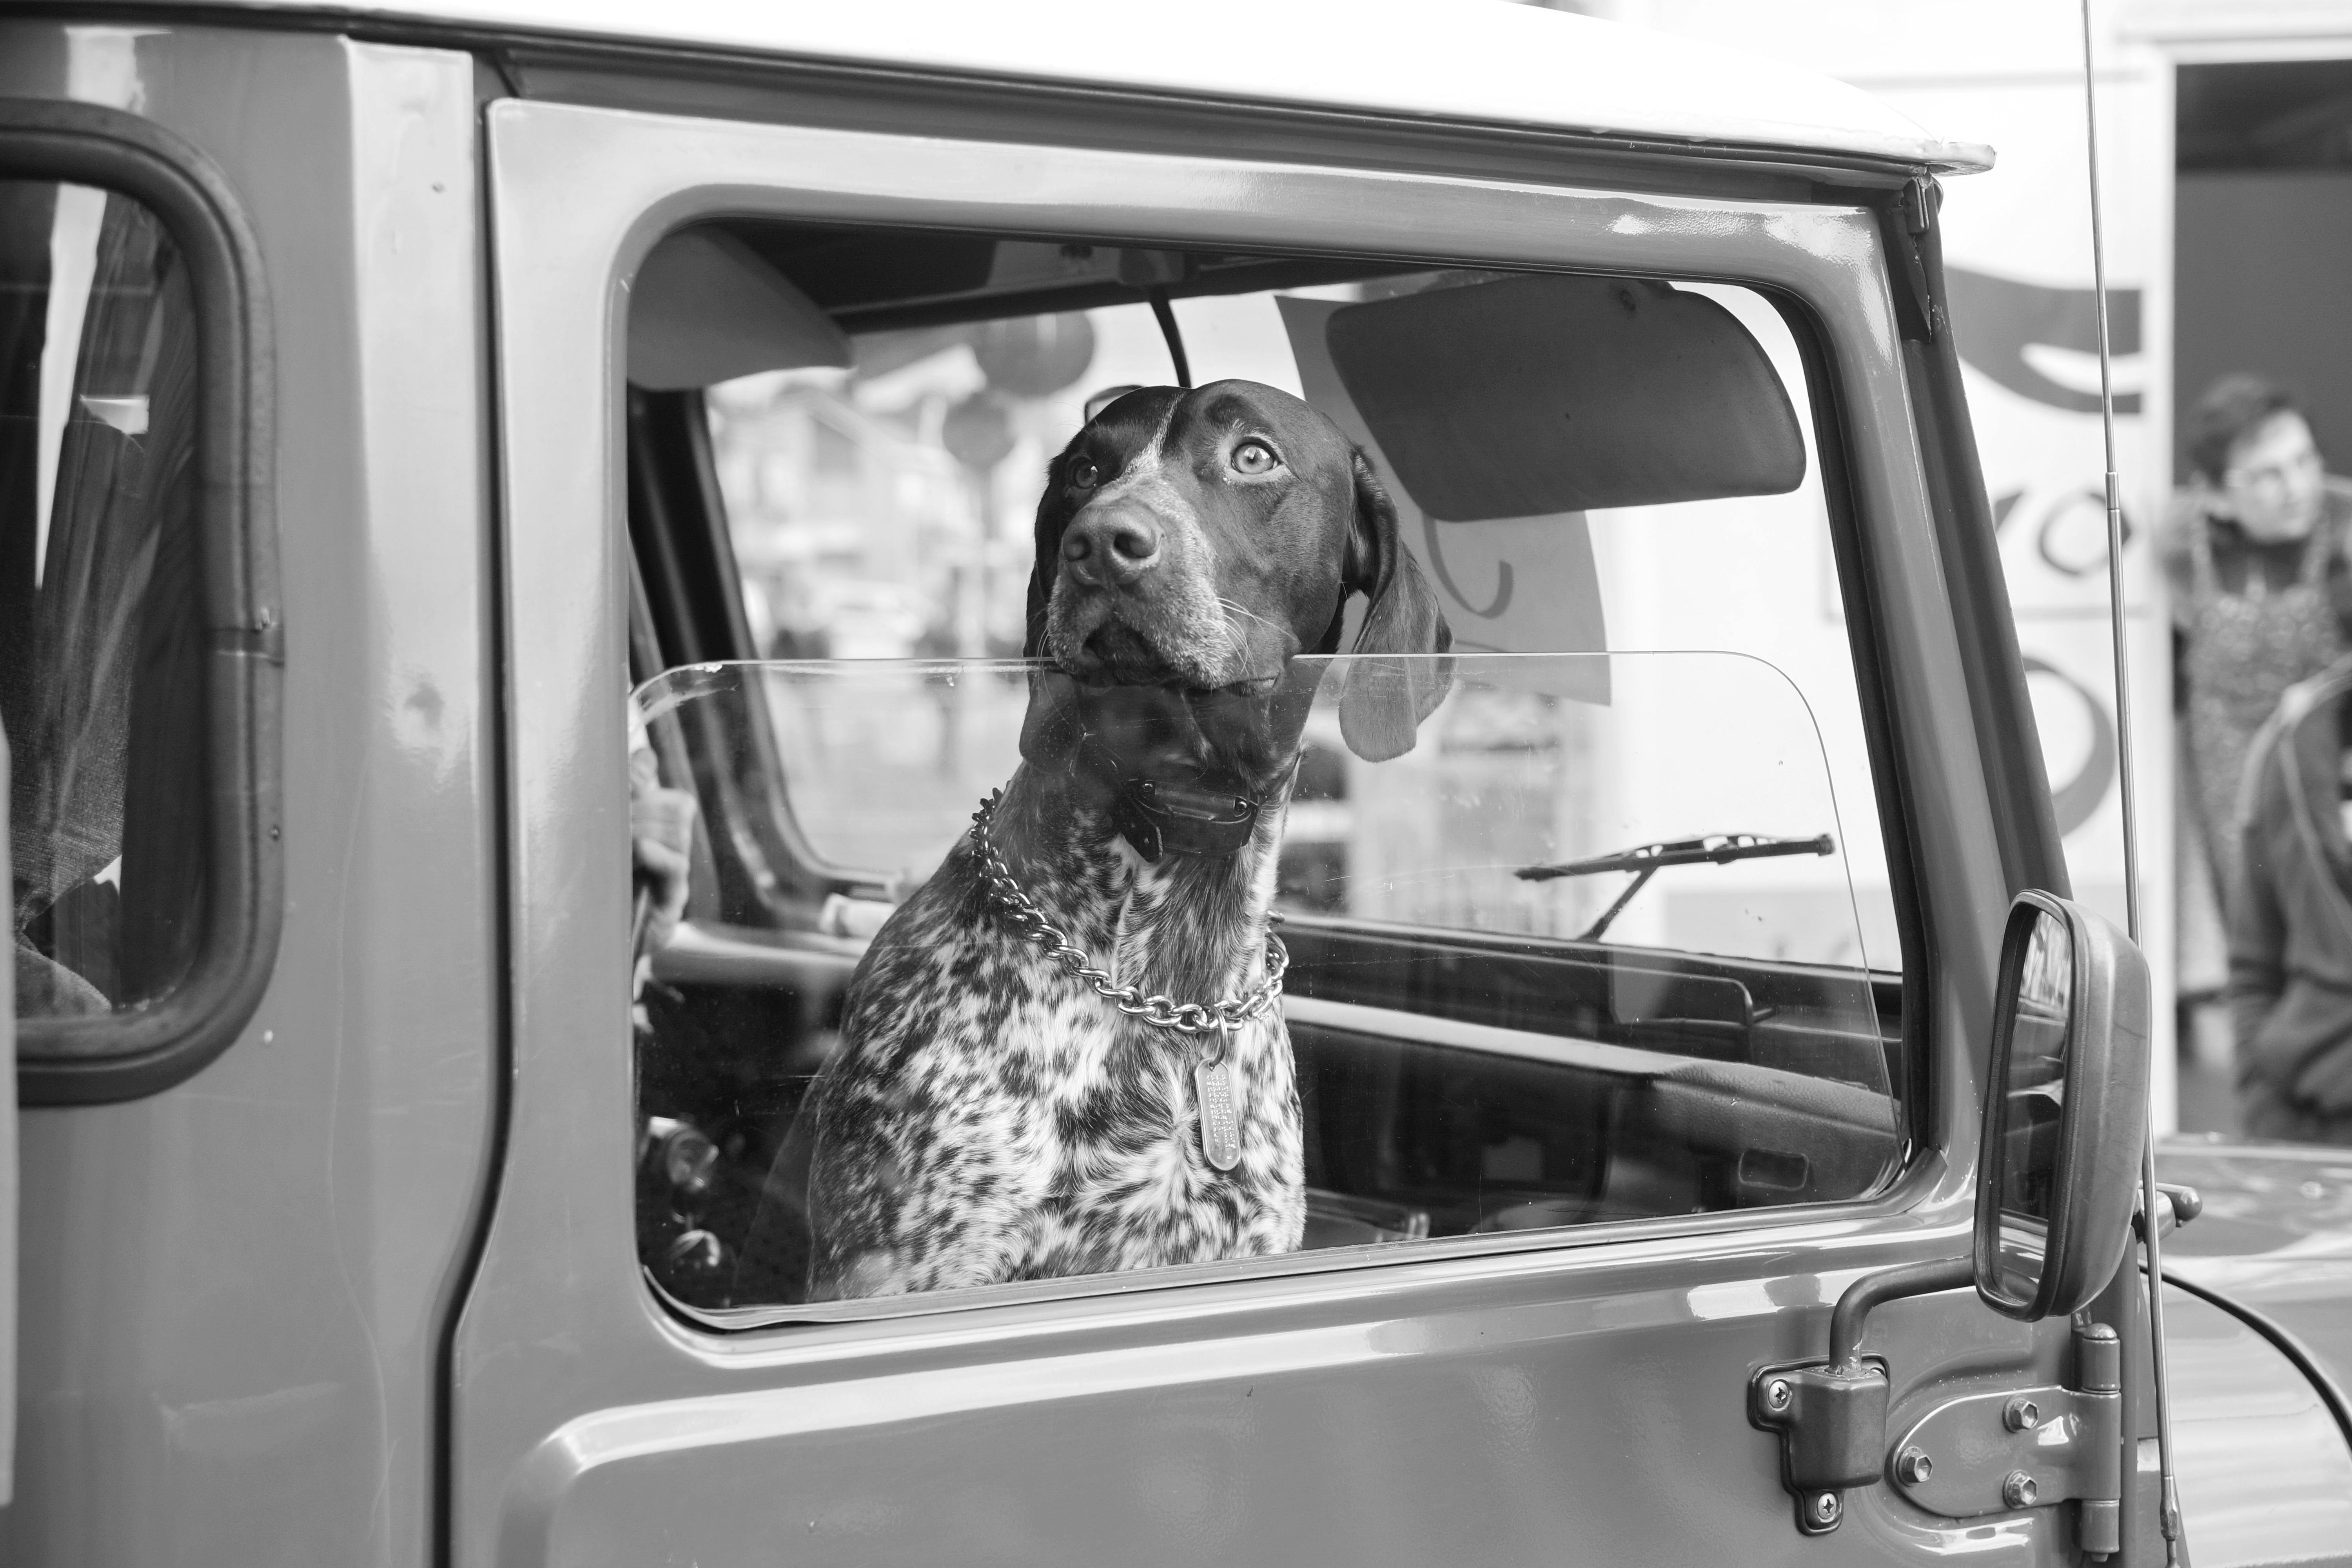 Pet Travel Hacks: Making Trips Comfortable for Your Furry Friends